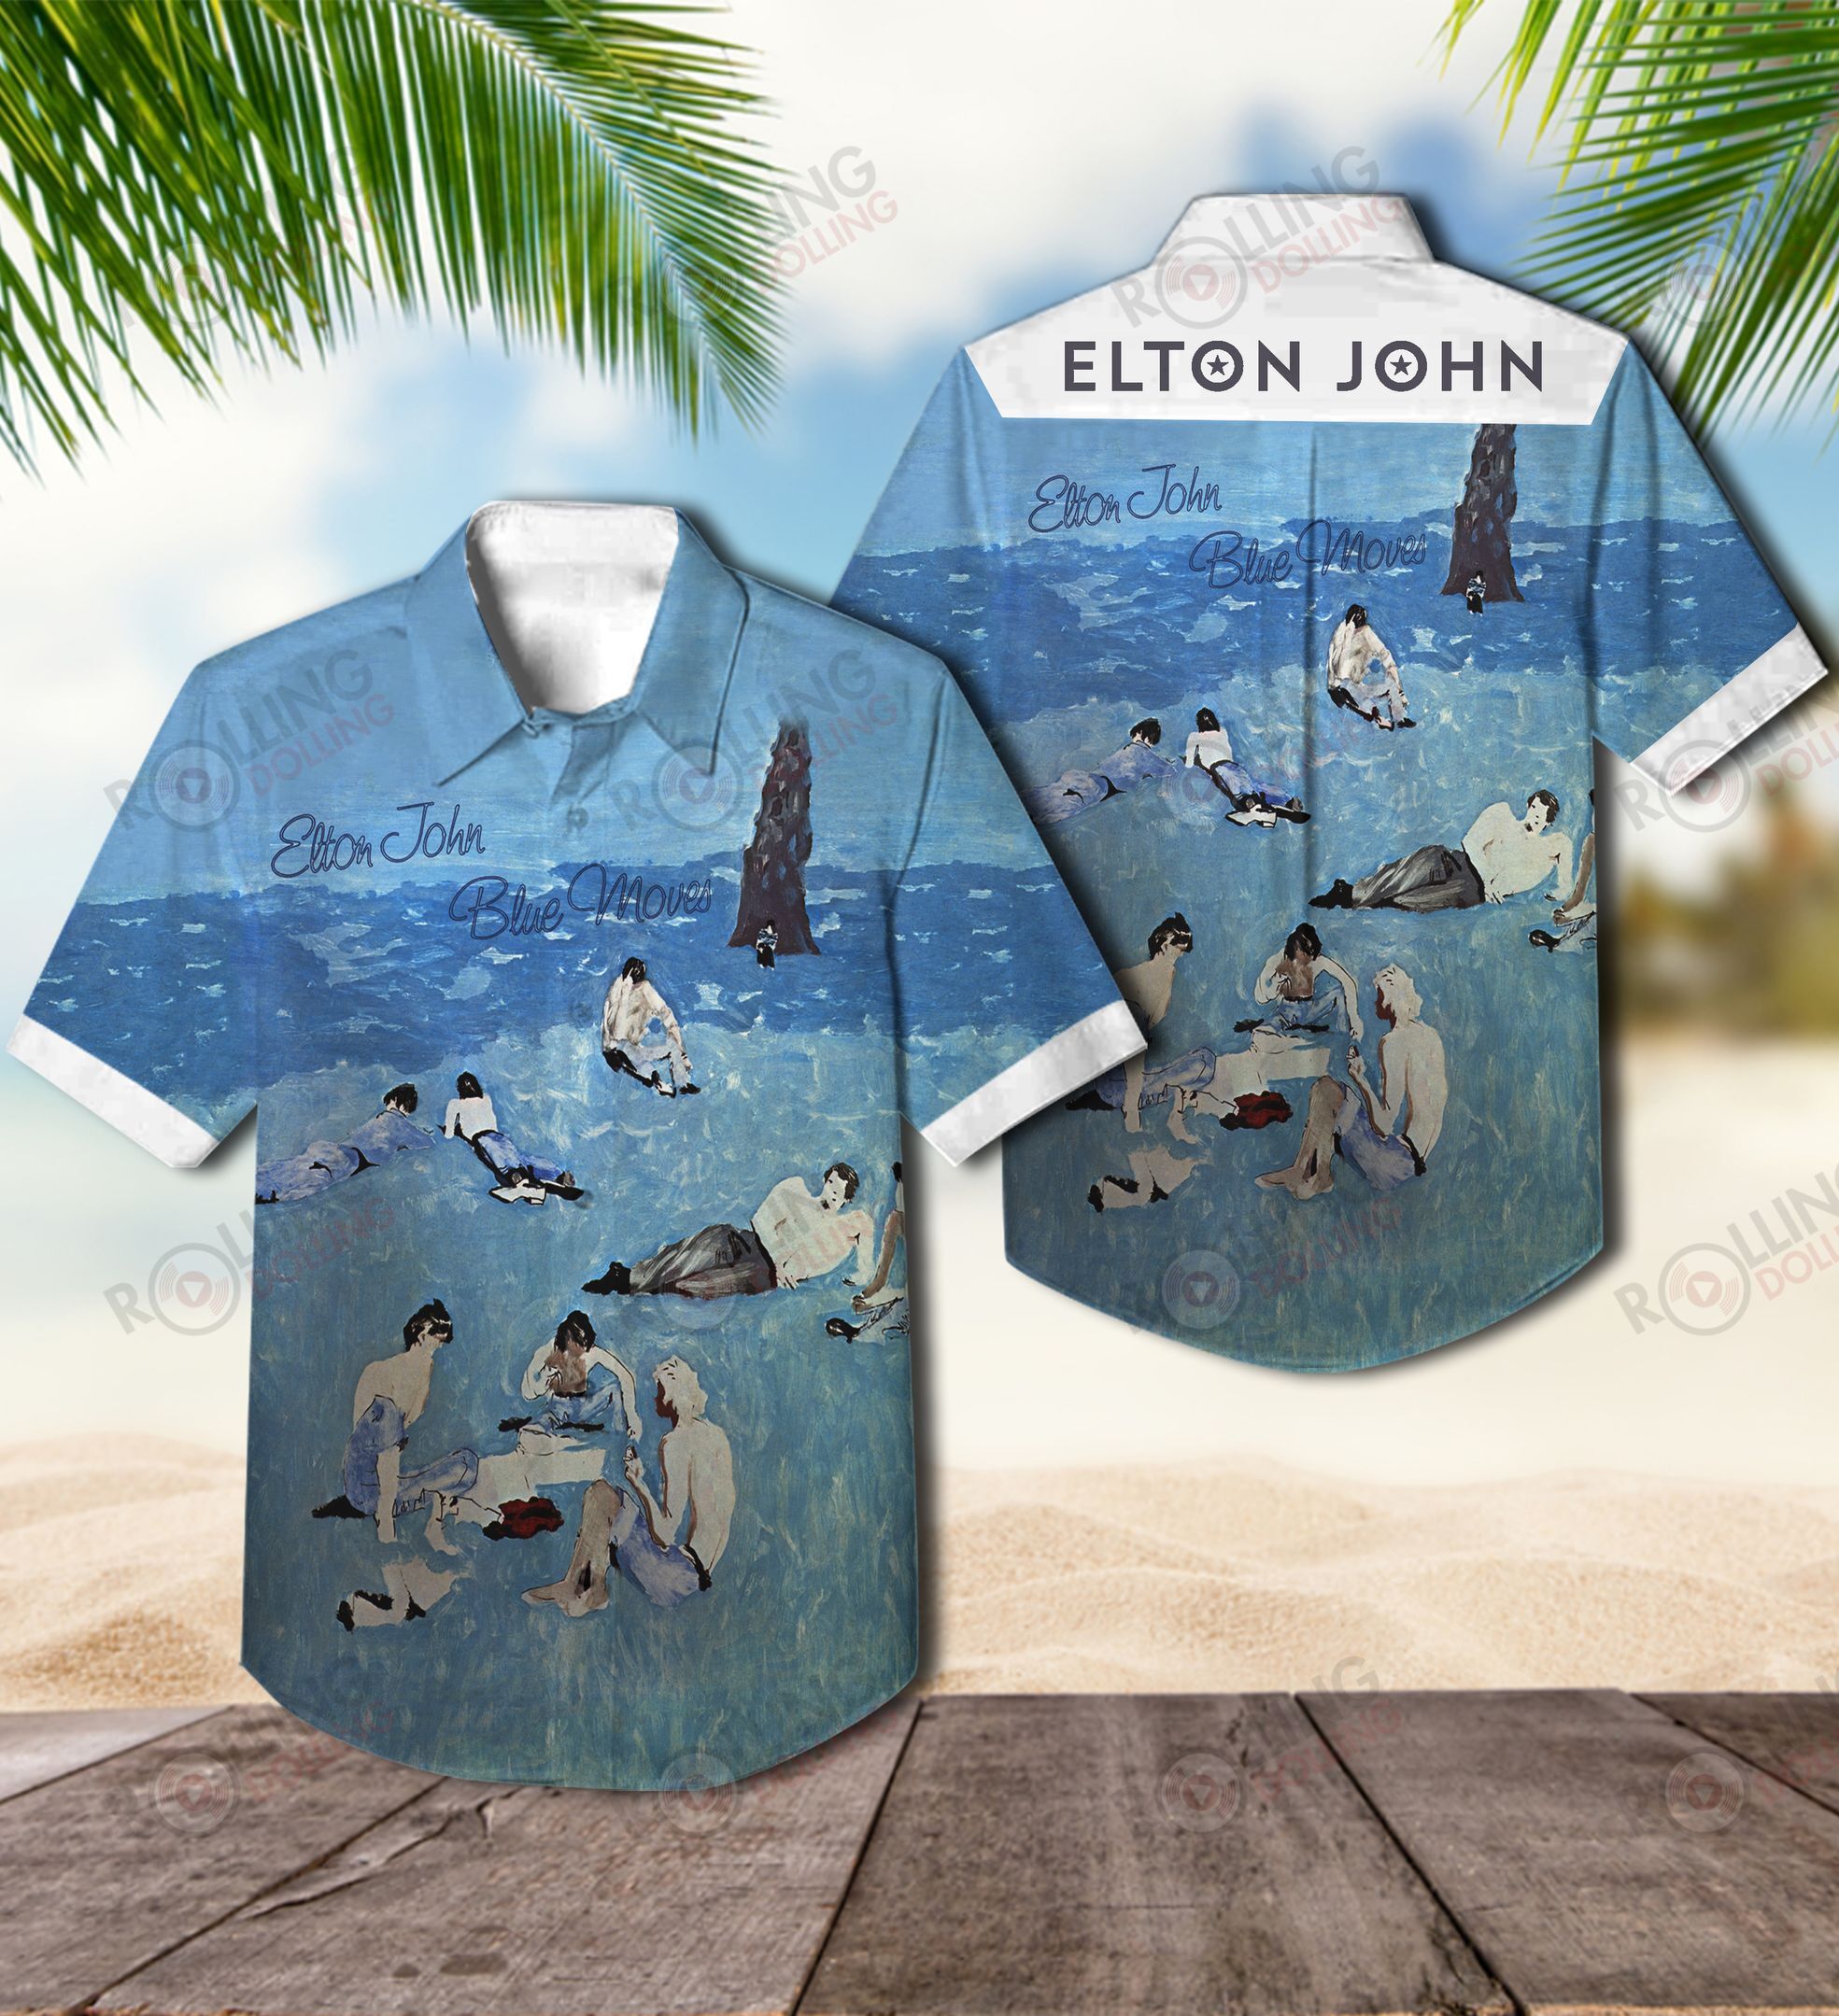 You'll have the perfect vacation outfit with this Hawaiian shirt 89